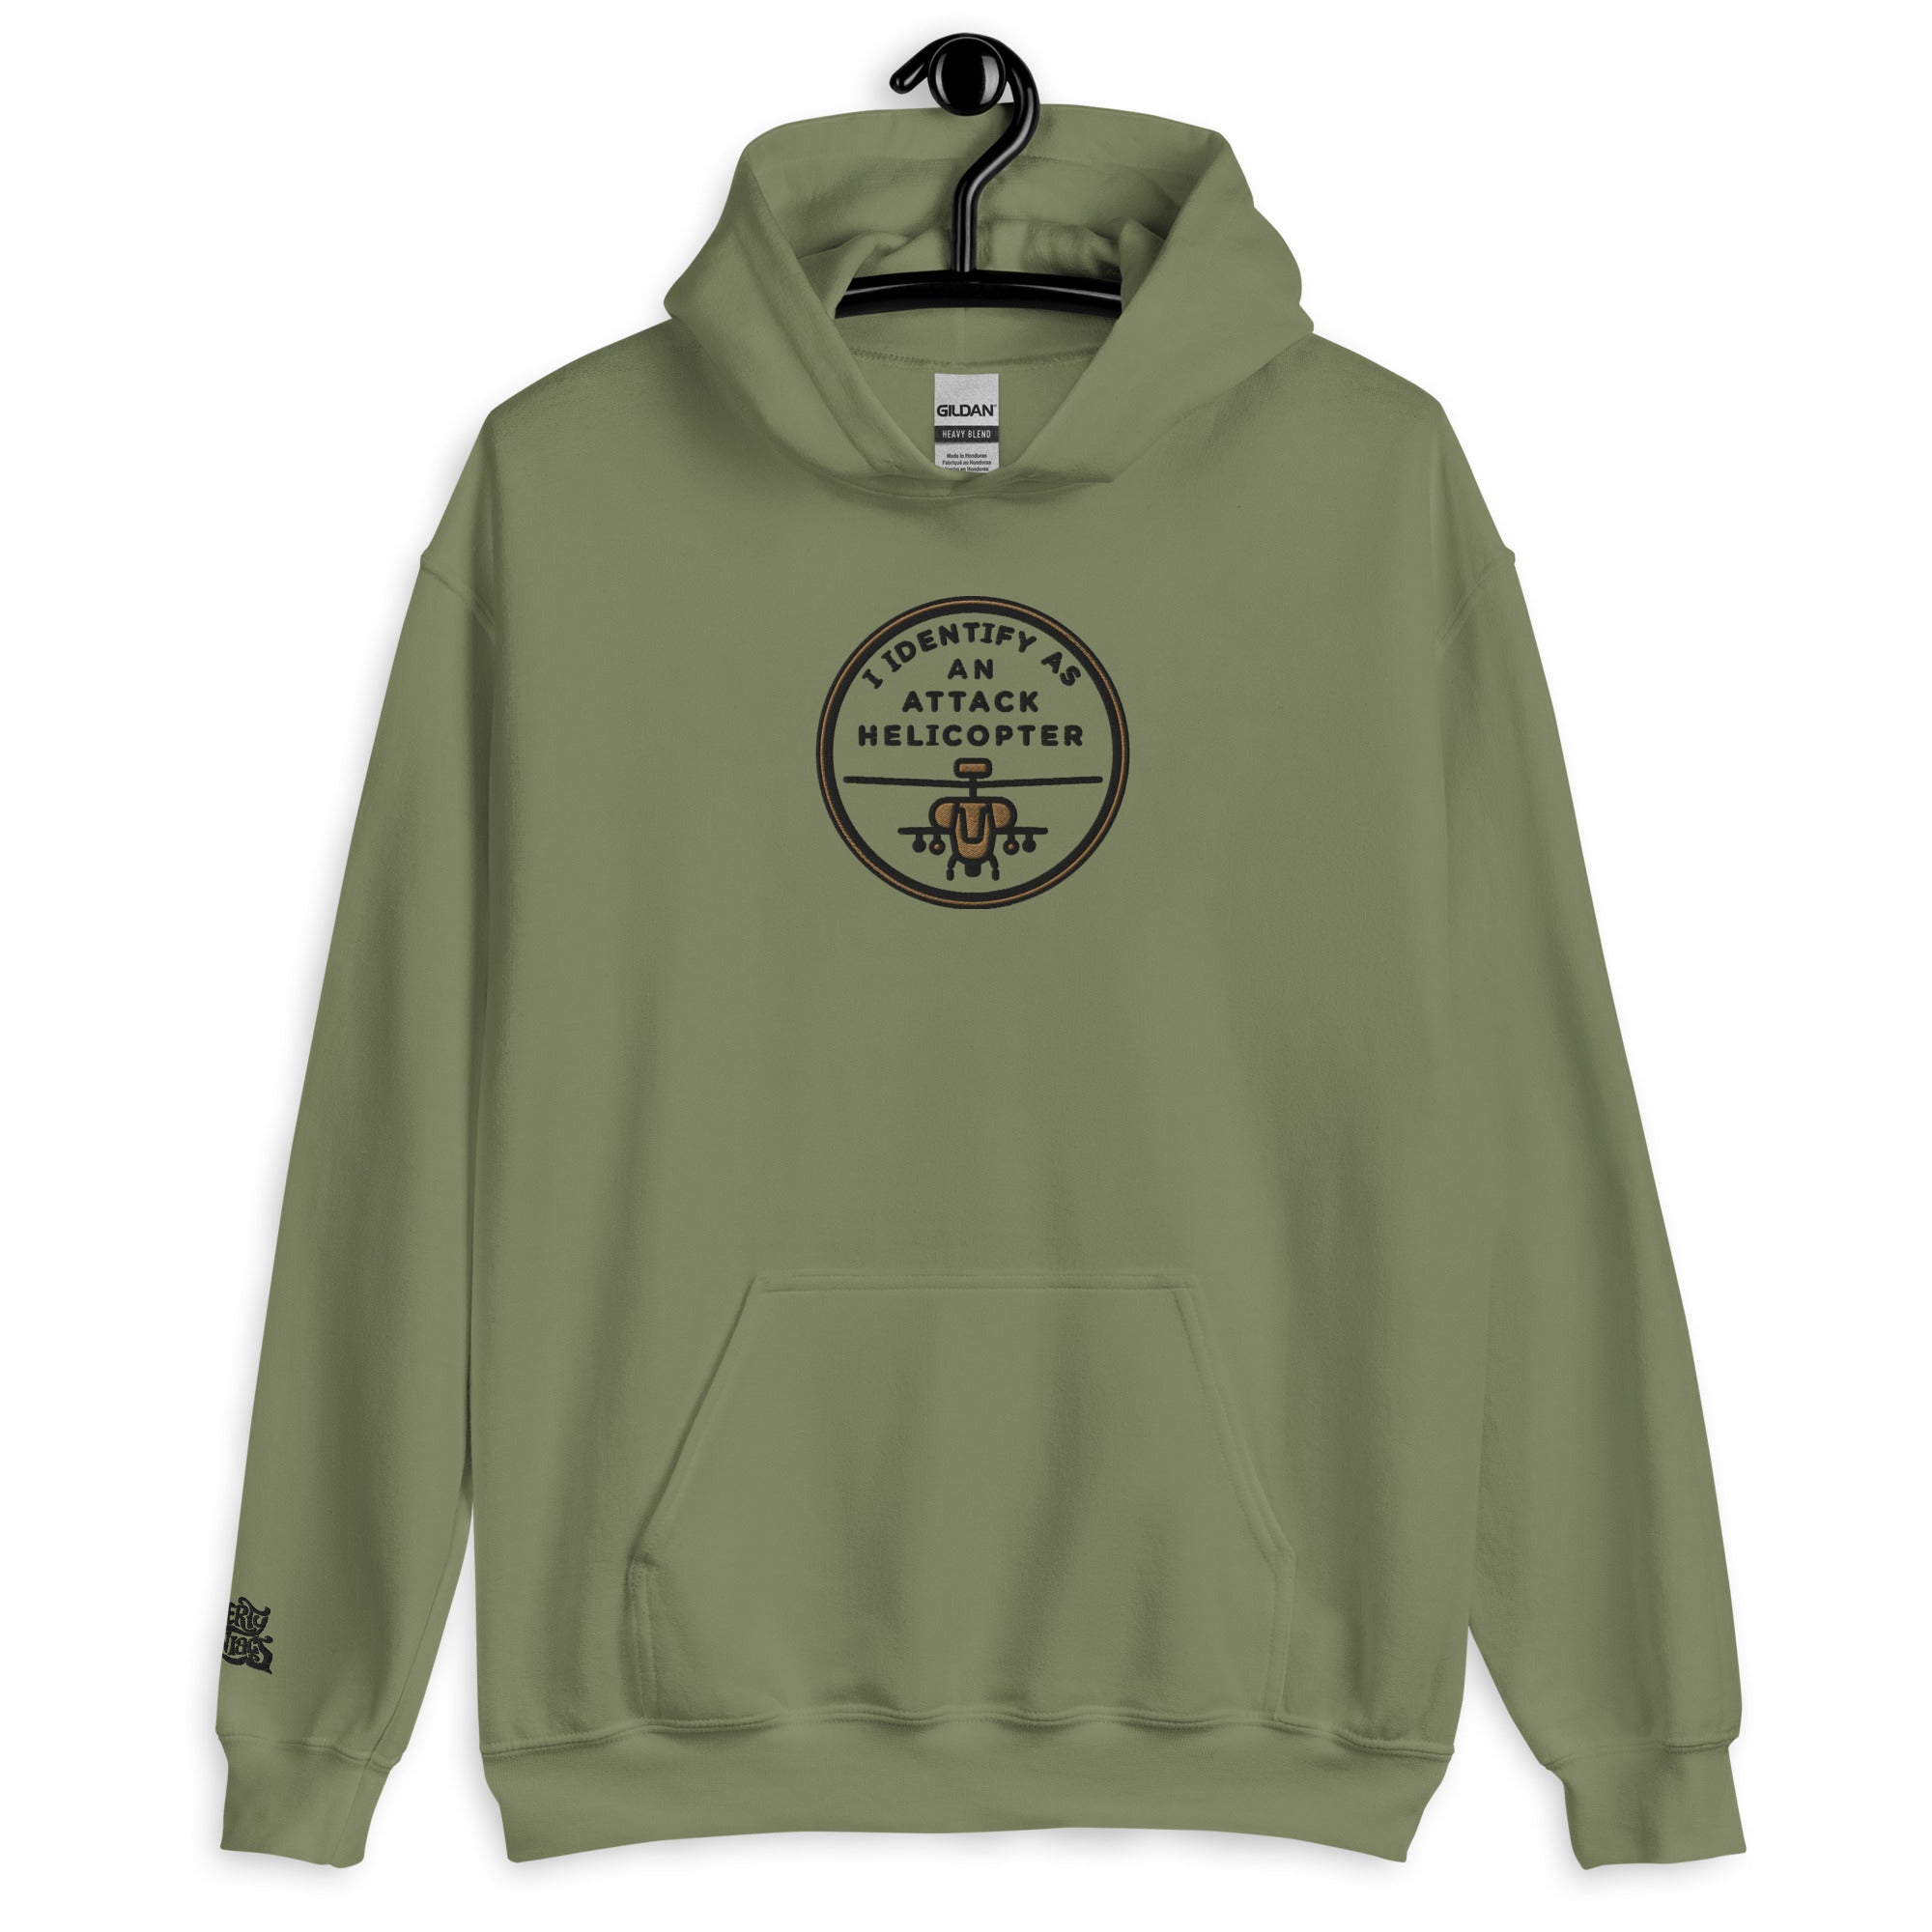 I Identify as an Attack Helicopter Embroidered Hoodie